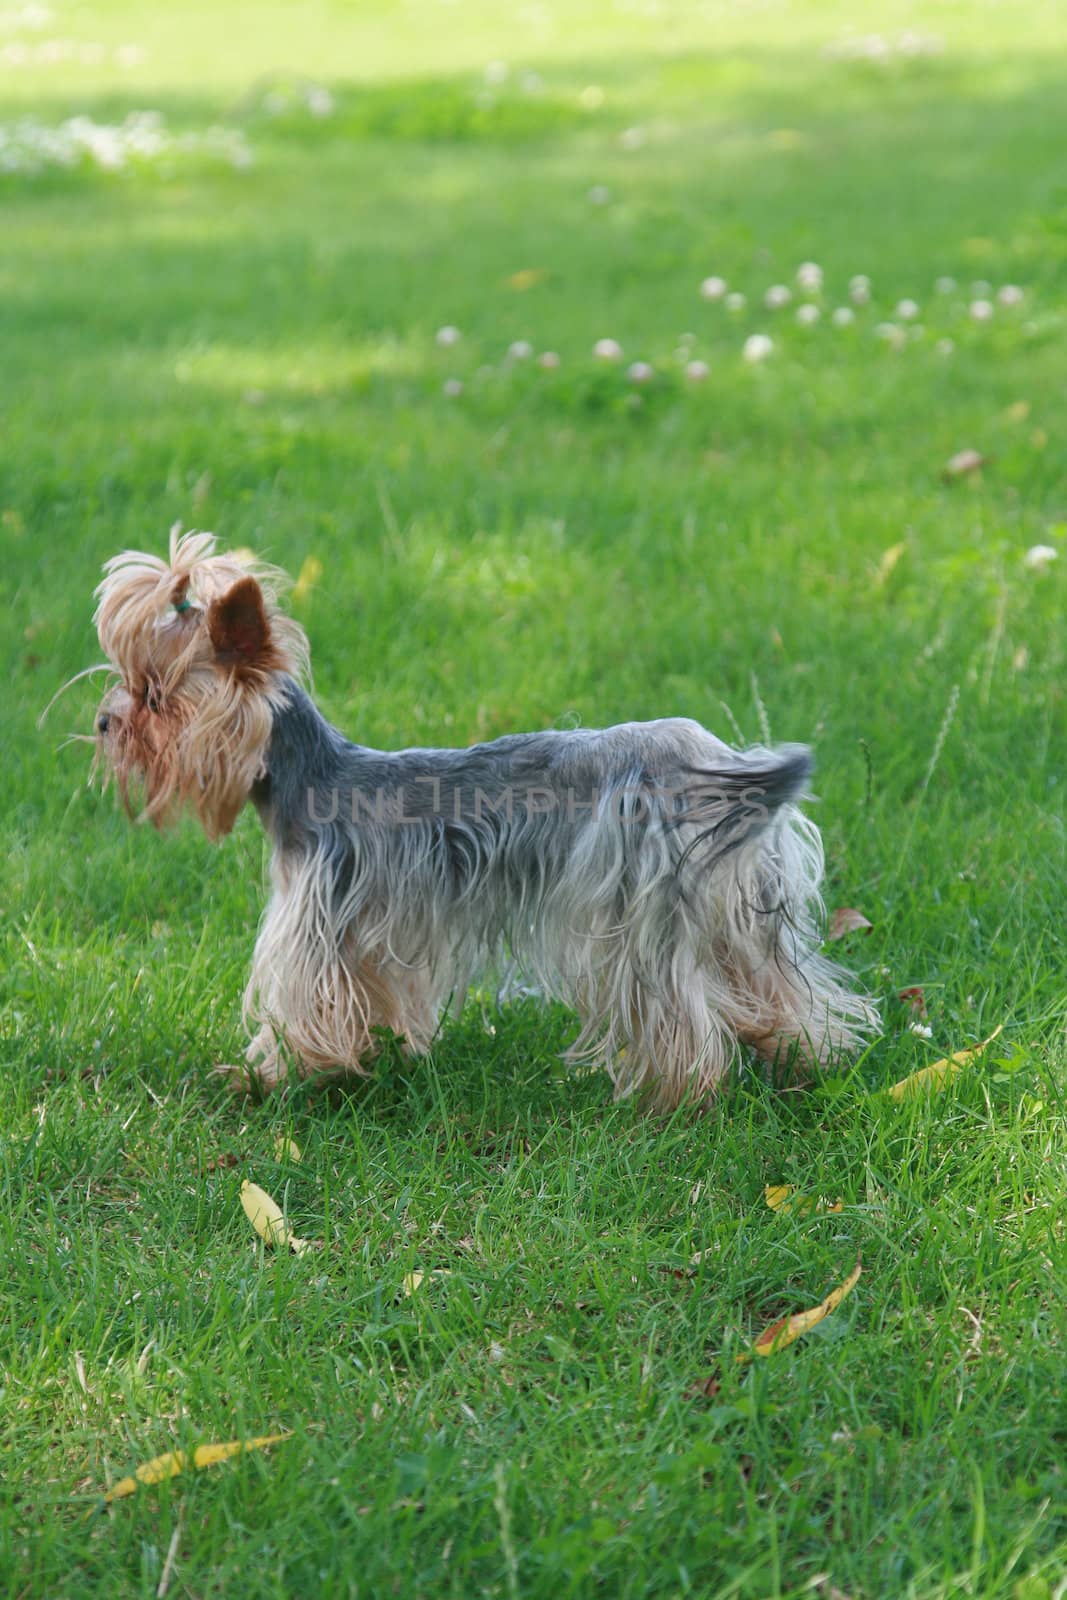 The small terrier costs on a green lawn